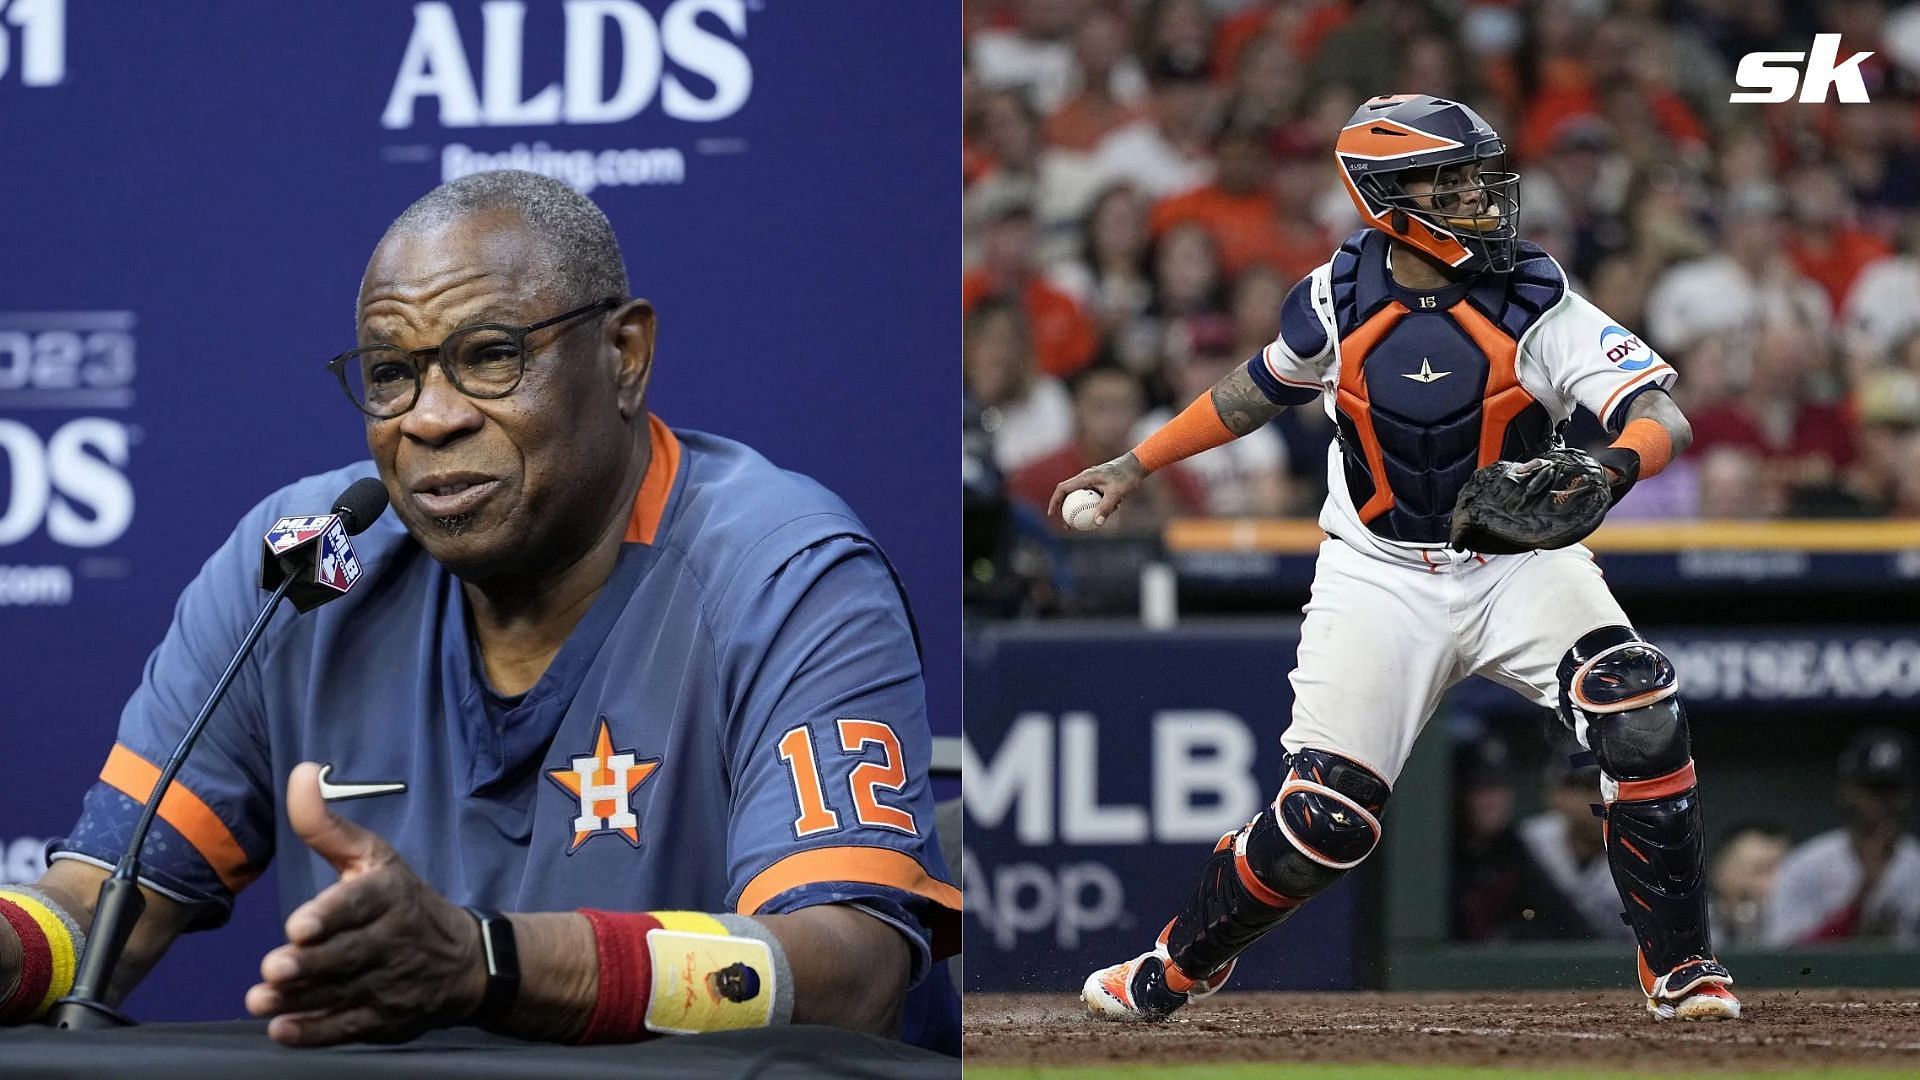 Astros fans aim jibe at embattled Martin Maldonado after Dusty Baker's  peculiar analogy - Dusty and Maldy both give me nightmares